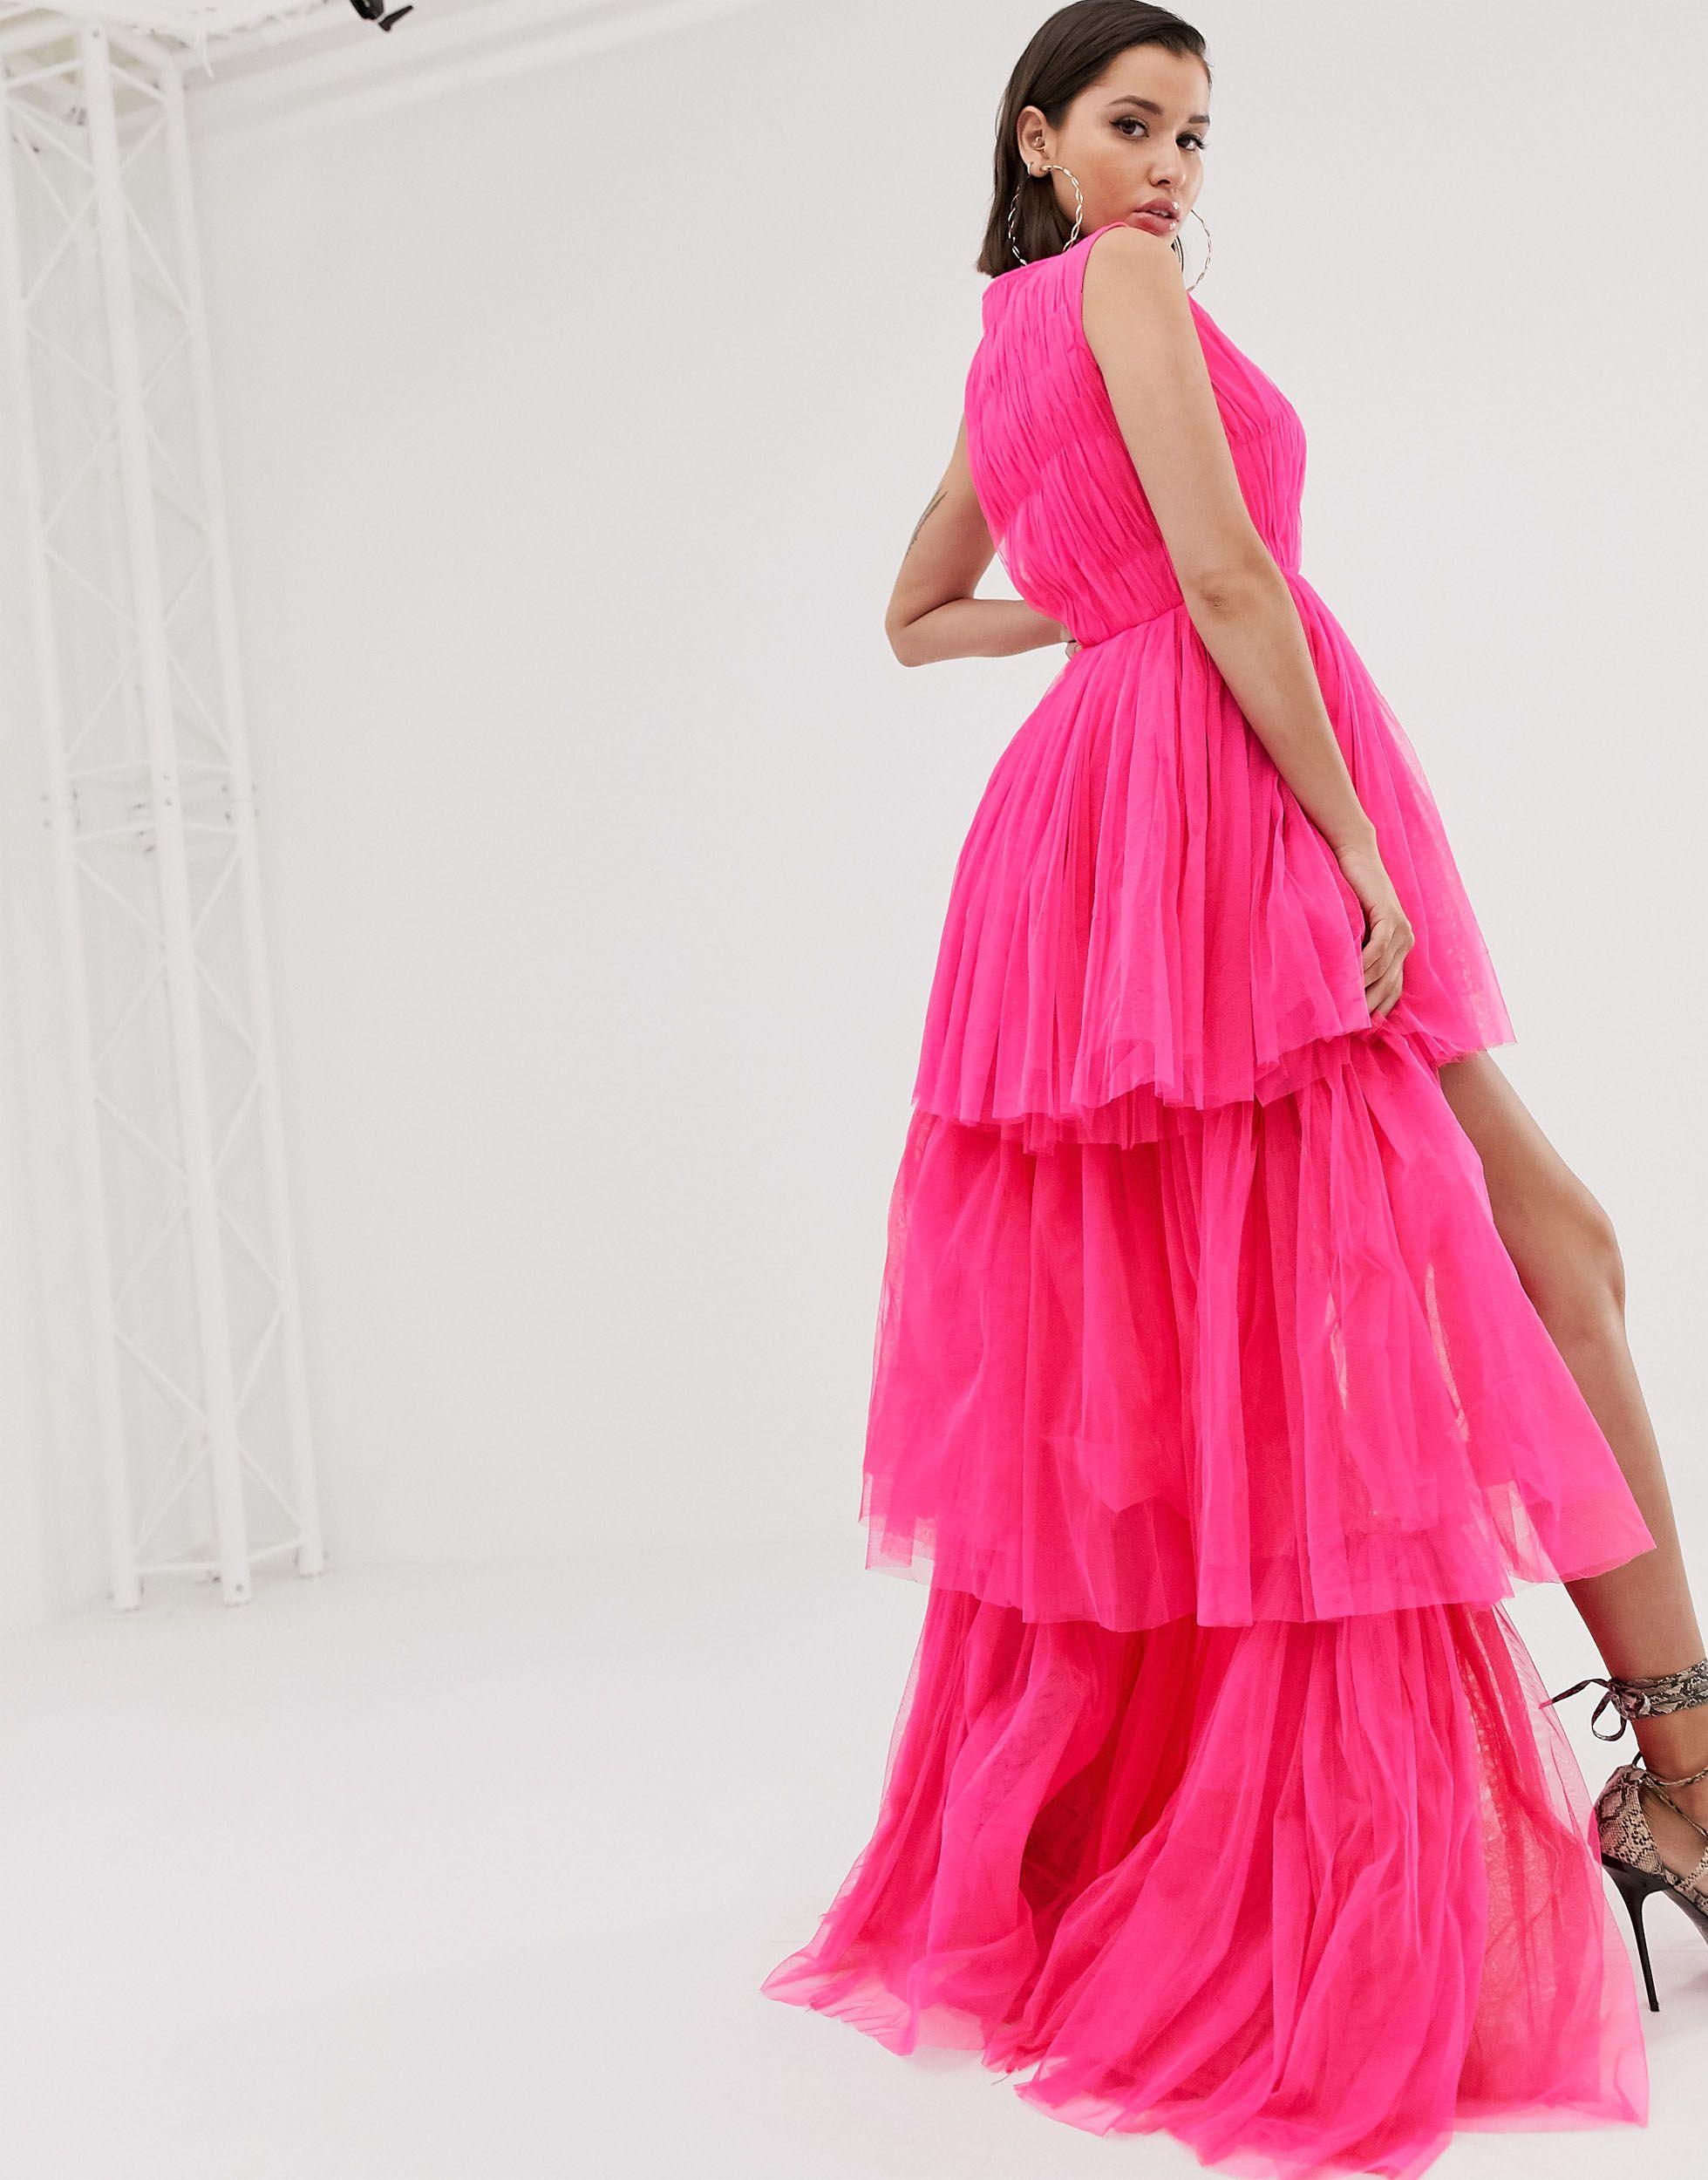 BEADS Tulle Layered Maxi Dress in Pink ...